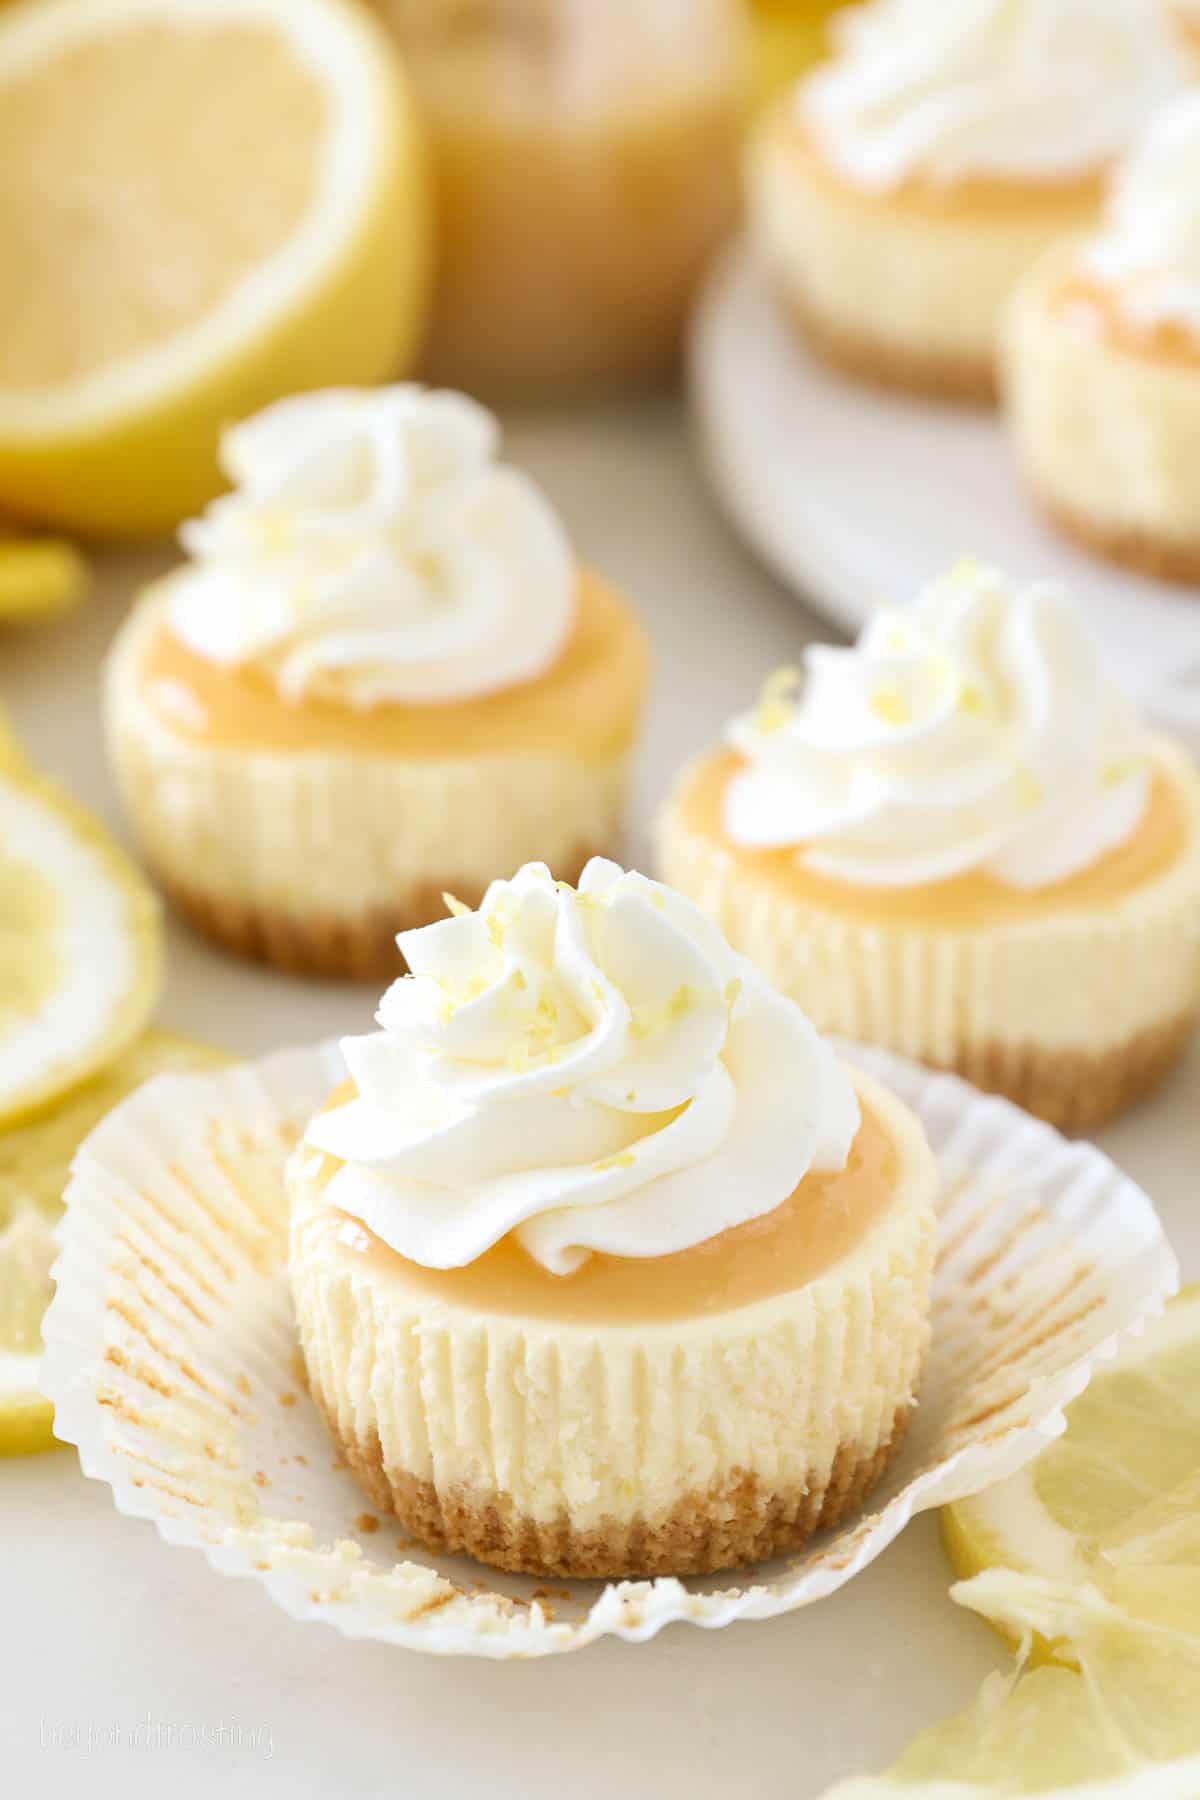 A partially unwrapped mini lemon cheesecake topped with whipped cream, surrounded by more mini cheesecakes.